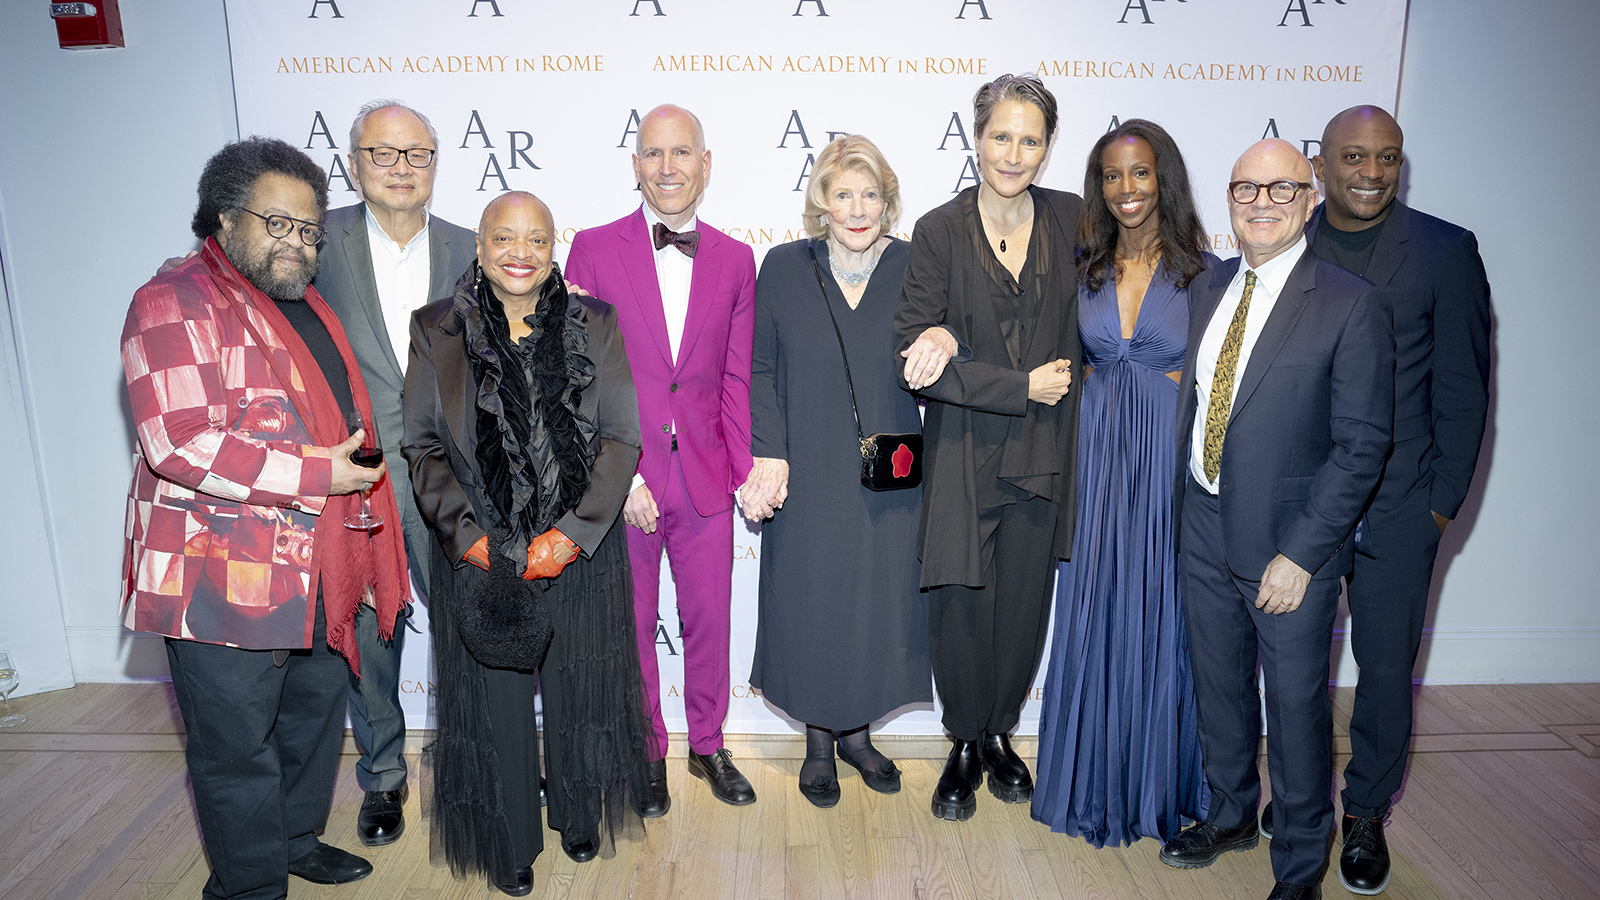 Over $1 Million Raised at AAR’s New York Gala | American Academy in Rome